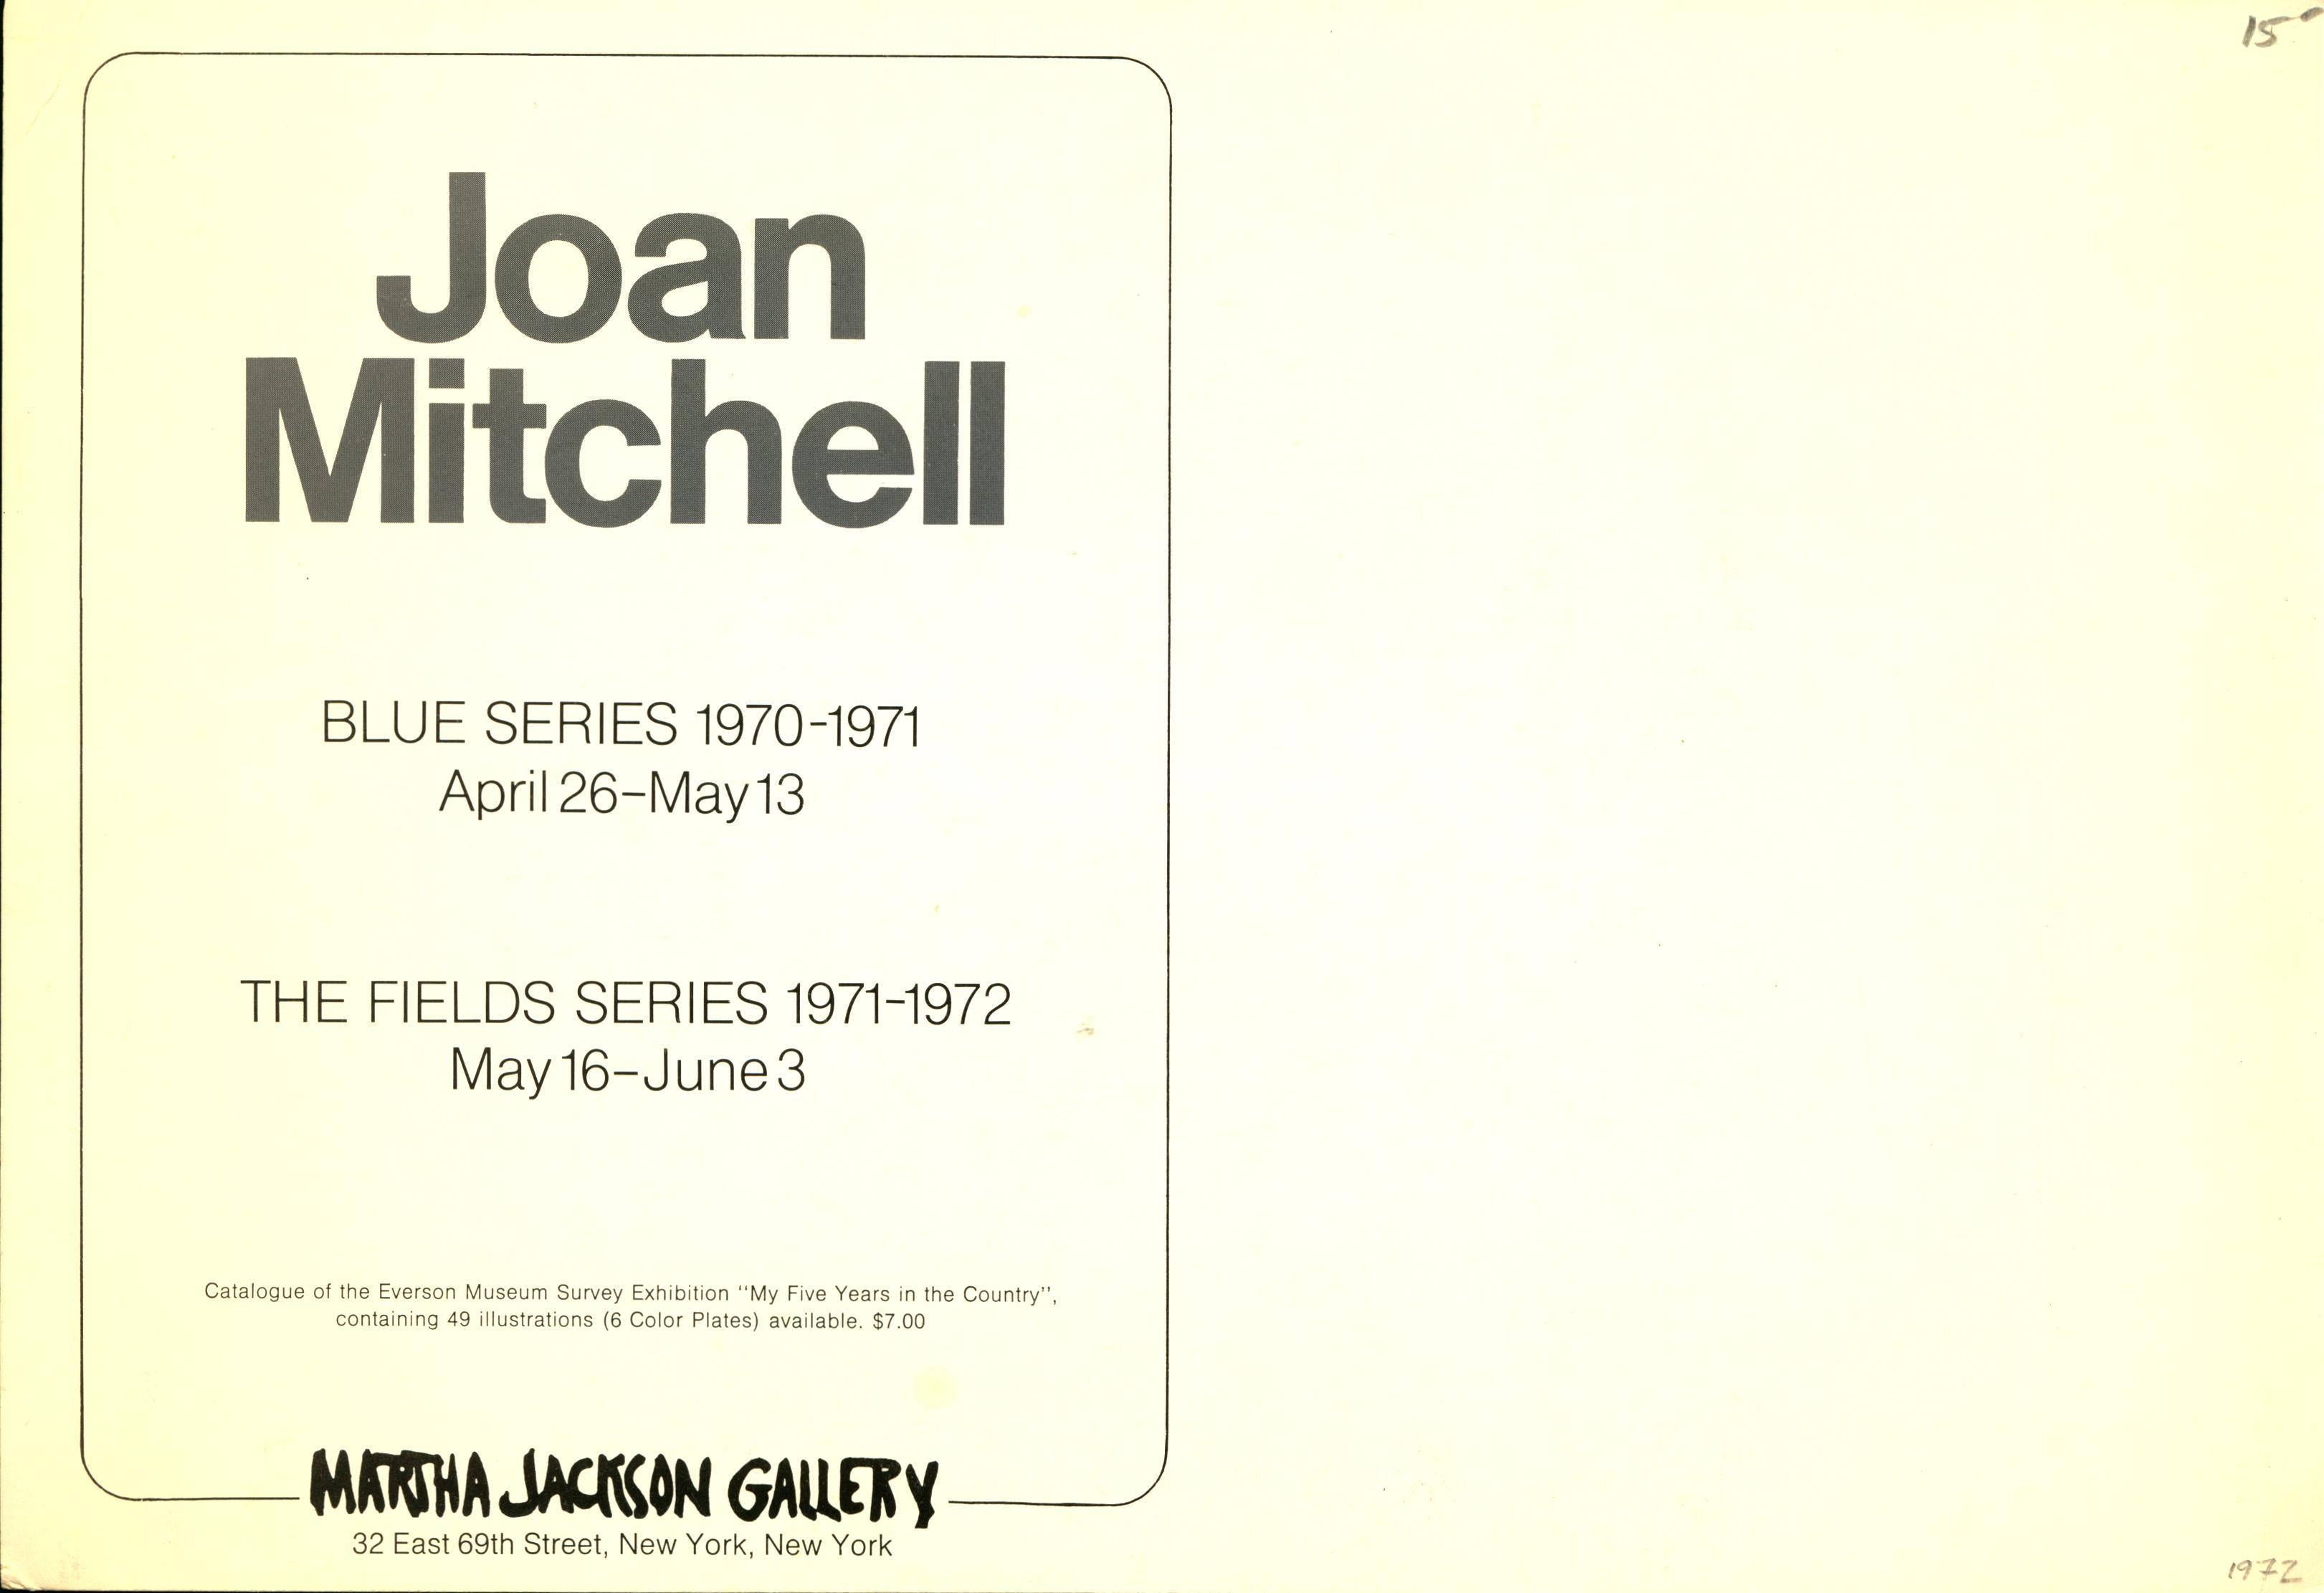 Vintage Joan Mitchell gallery exhibit card, 1971
Martha Jackson Gallery, New York, where selected work was exhibited as Blue Series 1970–1971 (April 26–May 13) and the fields series 1971–1972 (May 16–June 3). 

Off-set print 
7.5 x 11 inches.